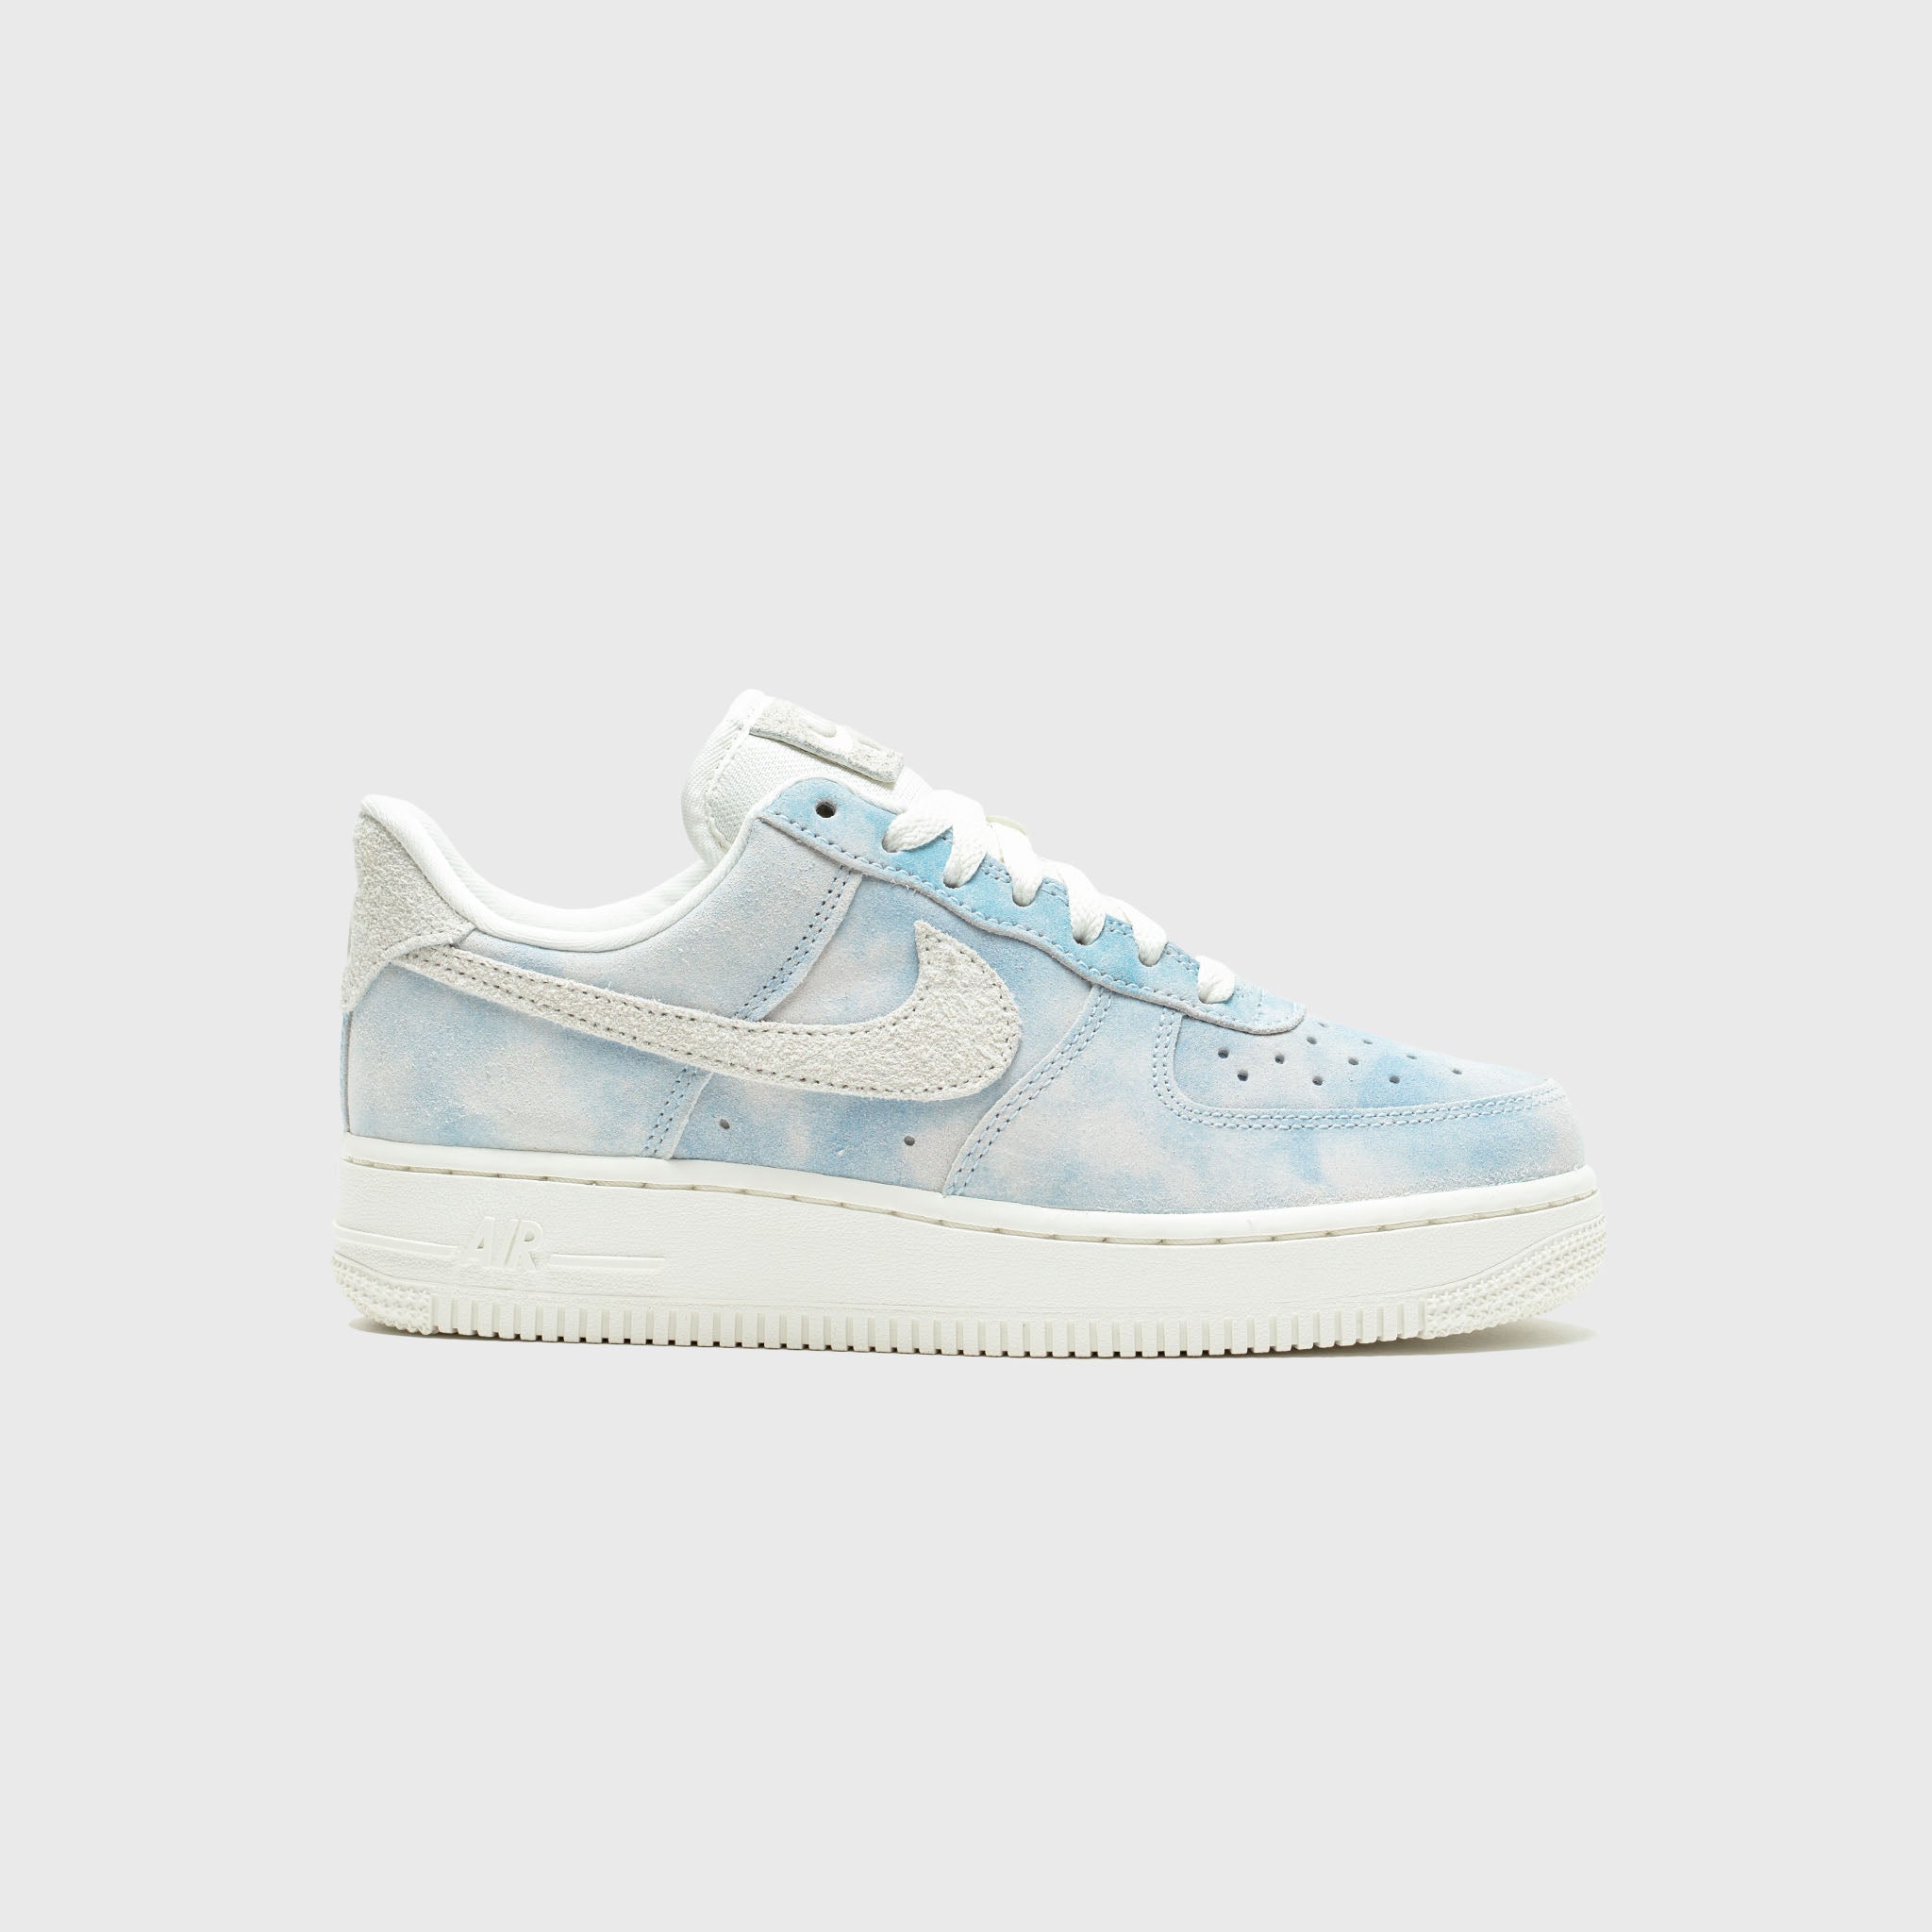 nike air zoom huarache ii flat sandals for women - WMNS AIR FORCE 1 LOW SE "TIE - DYE" – RvceShops SHOES